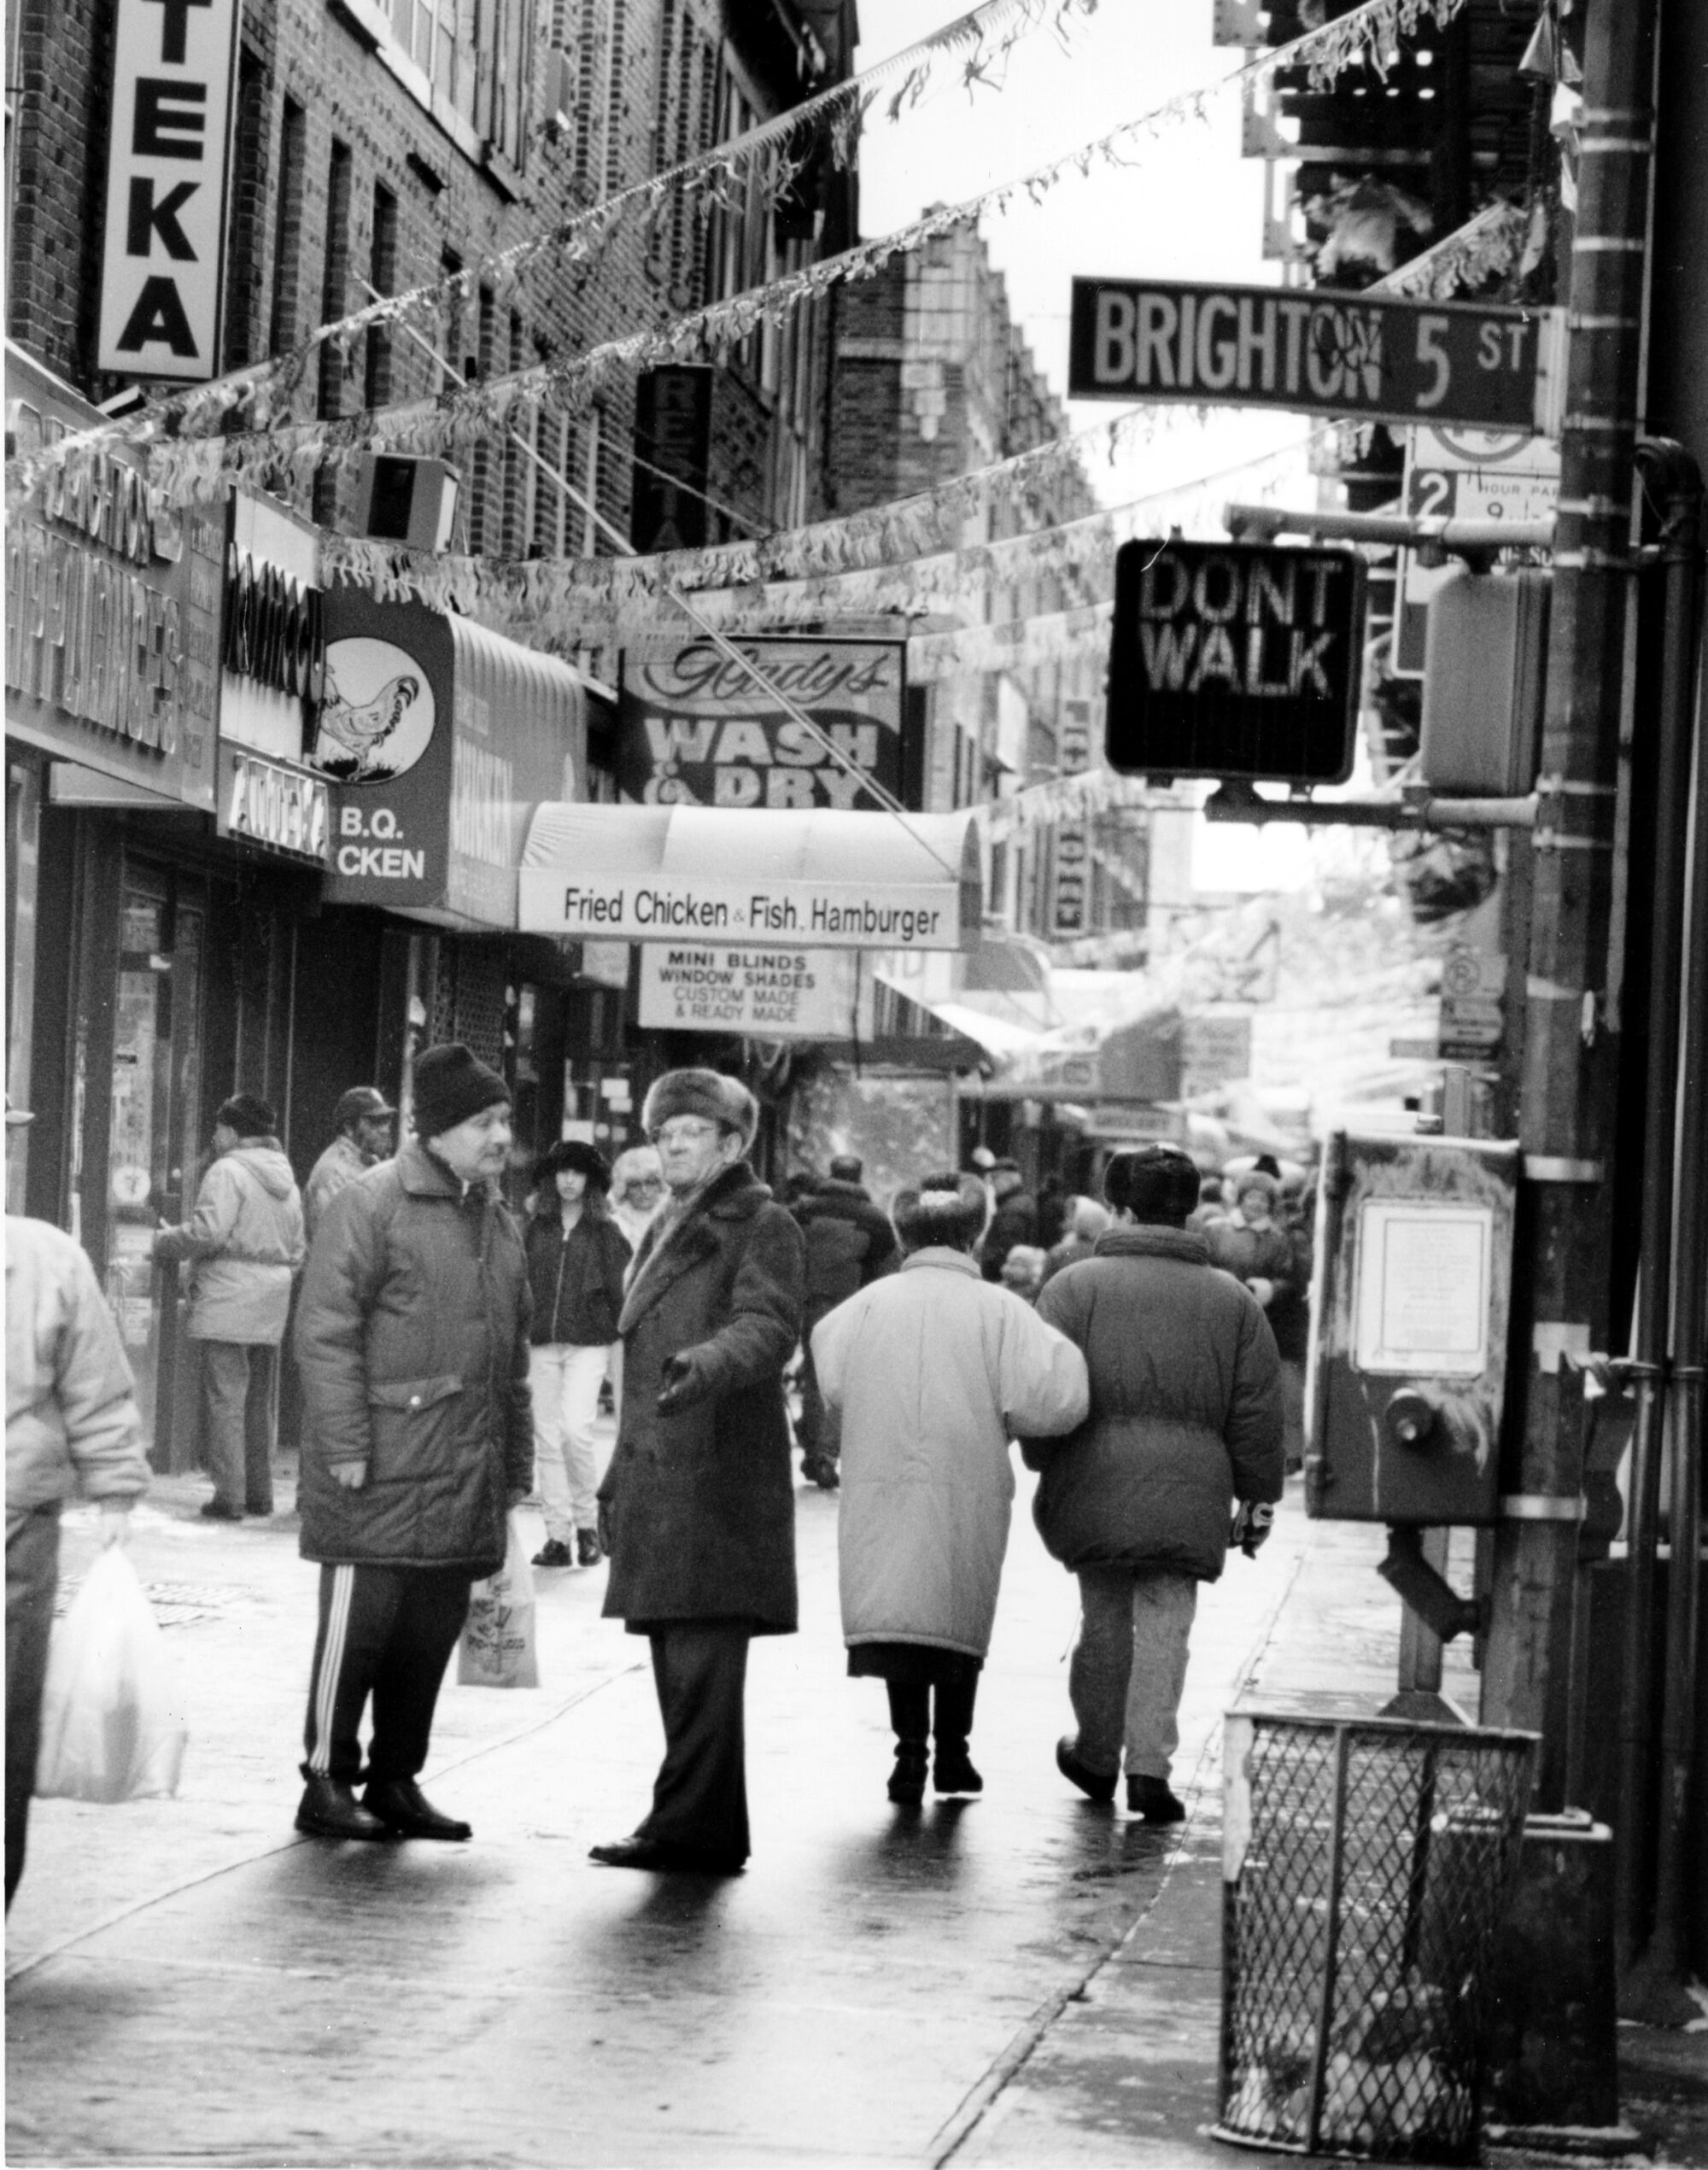 A black-and-white photo of people in coats and fur hats walking on the street.